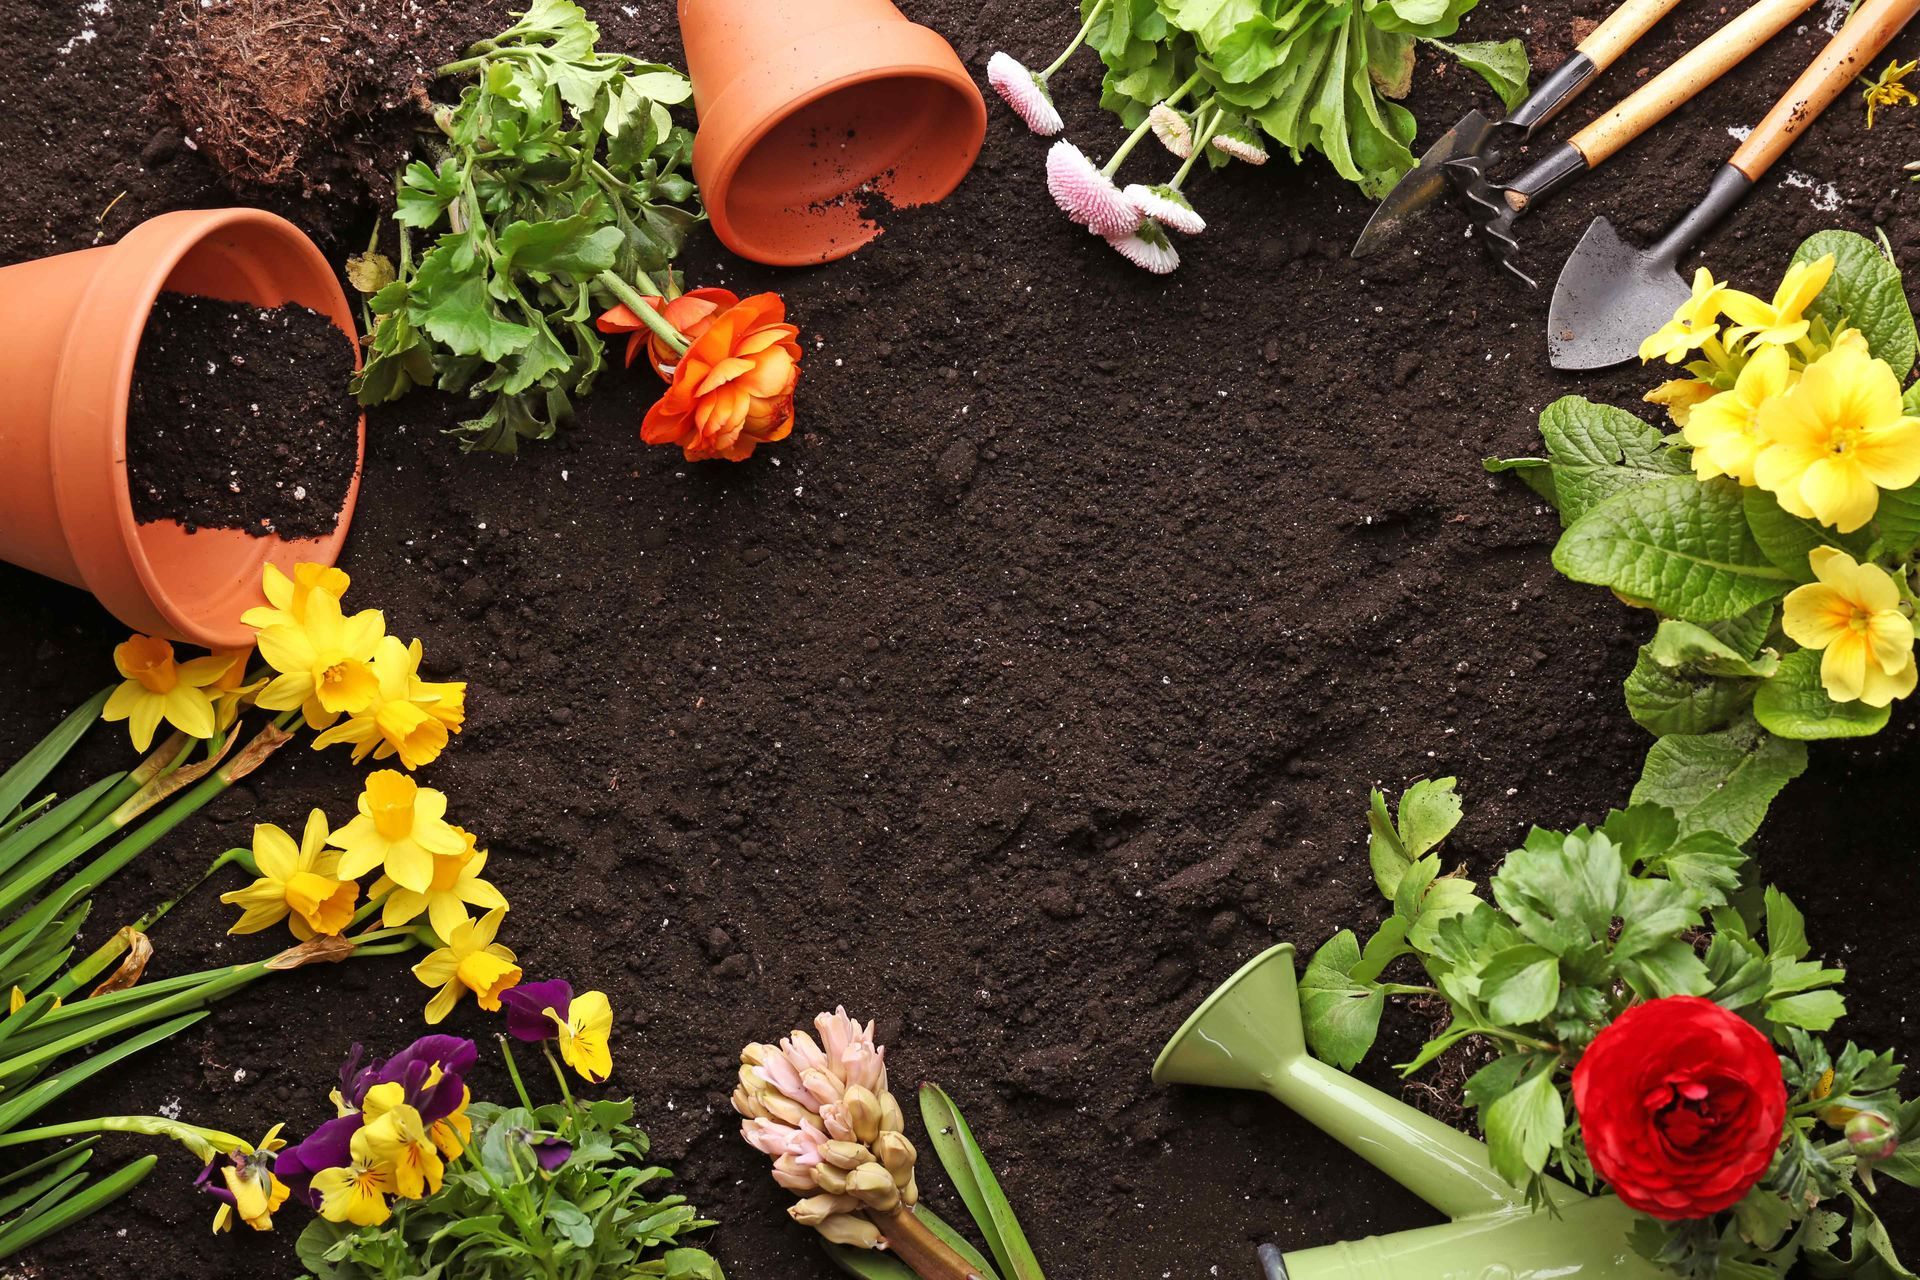 Gardening tools and plants in a circle on dirt